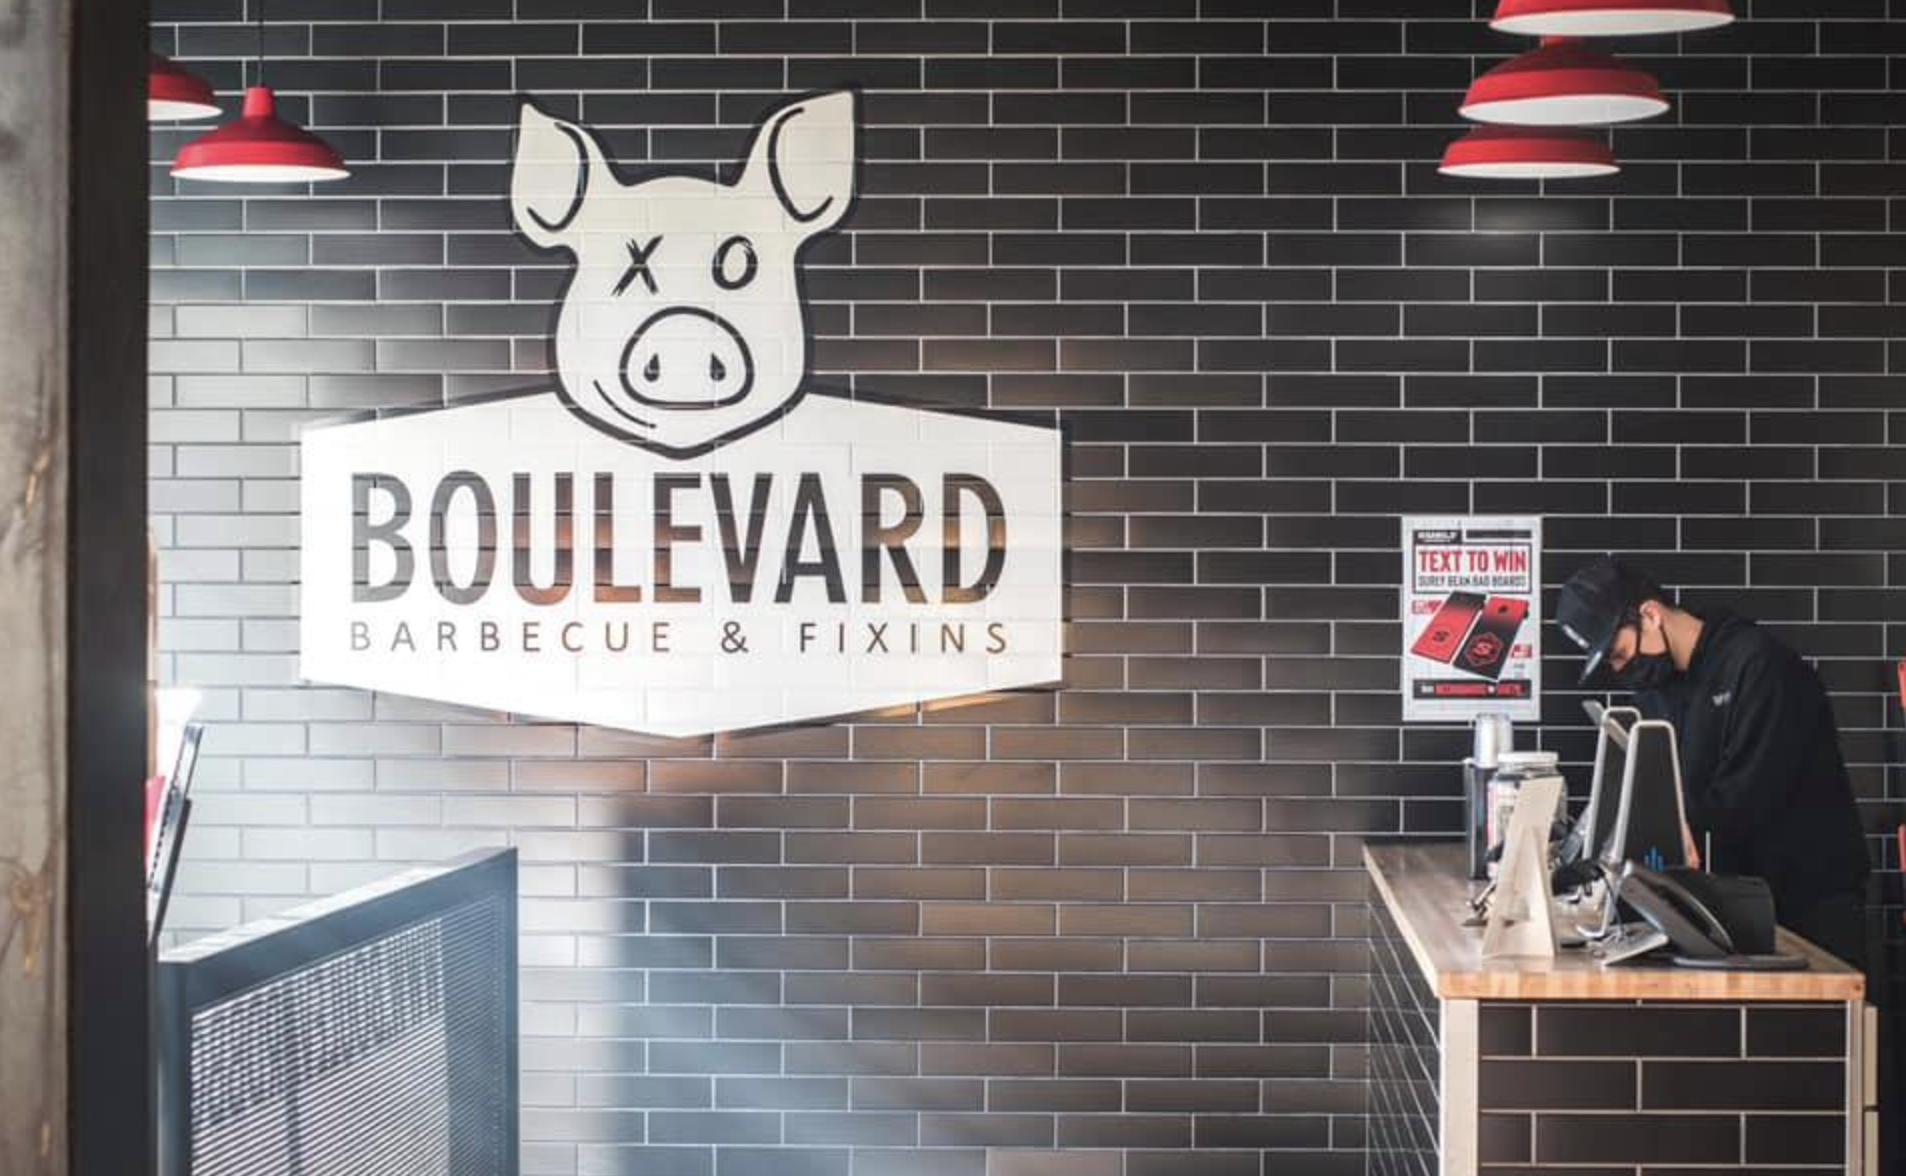 Boulevard Barbecue & Fixins